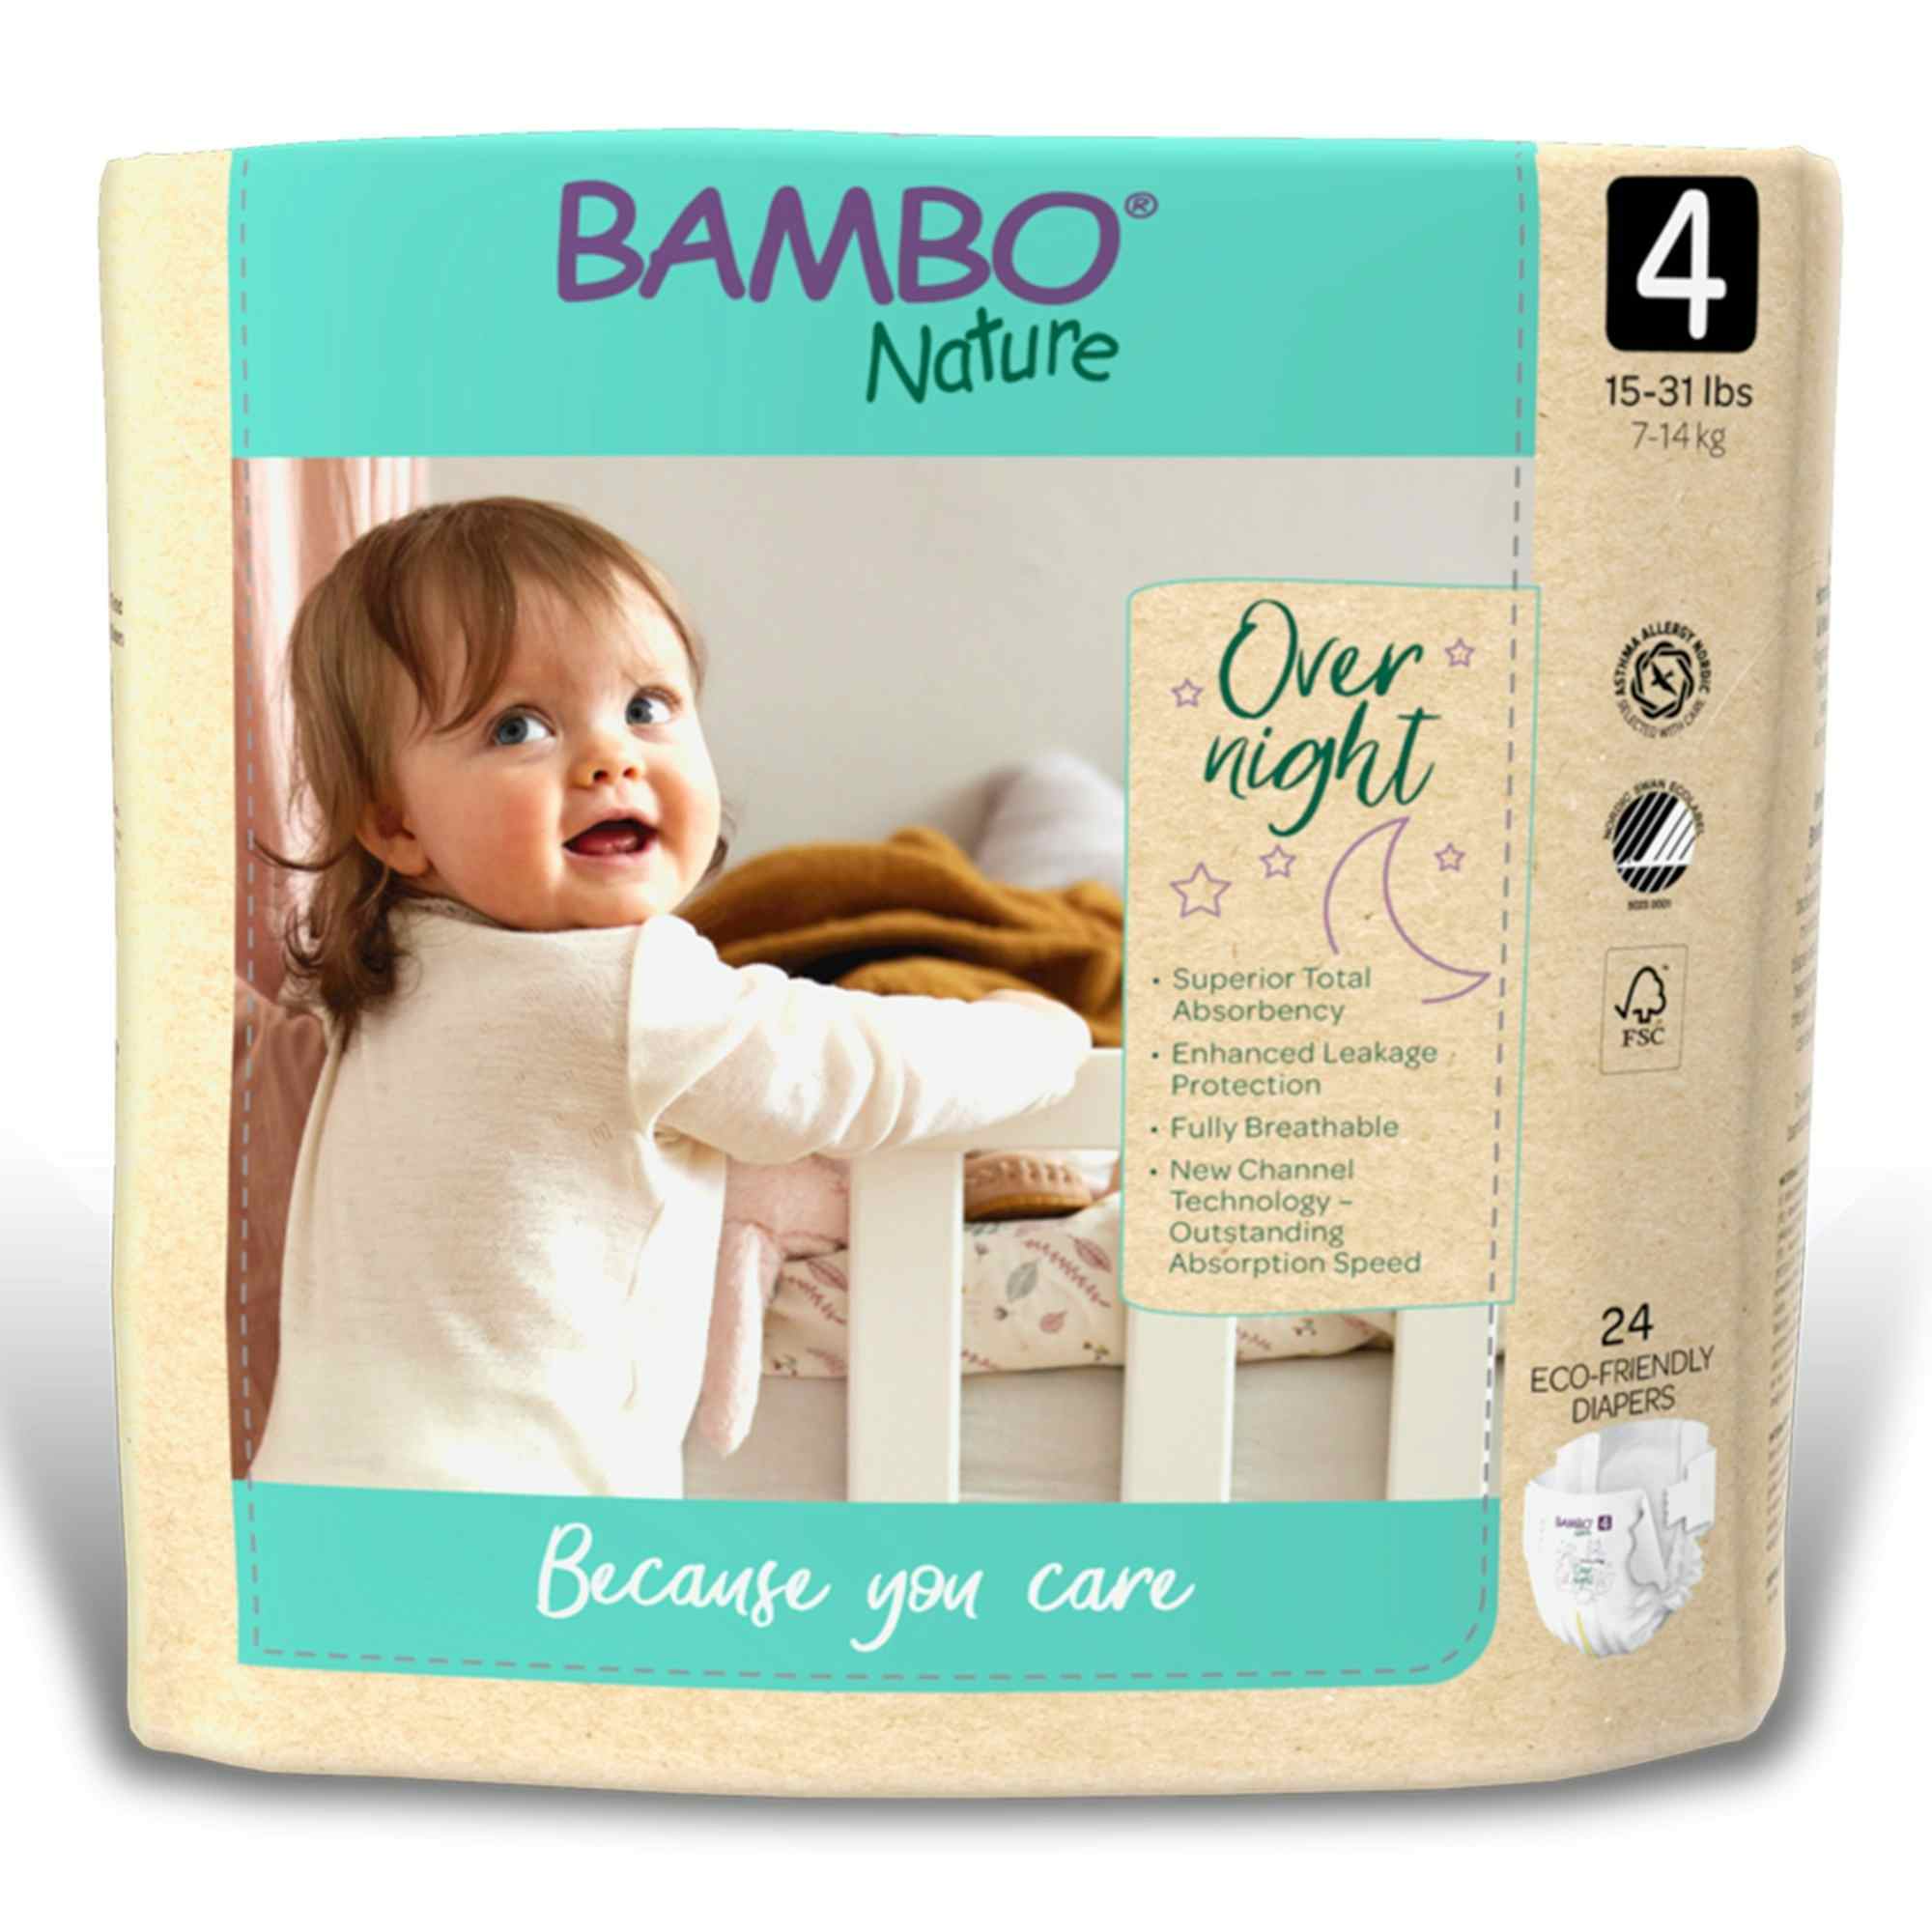 Bambo Nature Overnight Baby Diapers with Tabs, Heavy Absorbency, 1000021010, Size 4 (15 to 31 lbs.) - Pack of 24